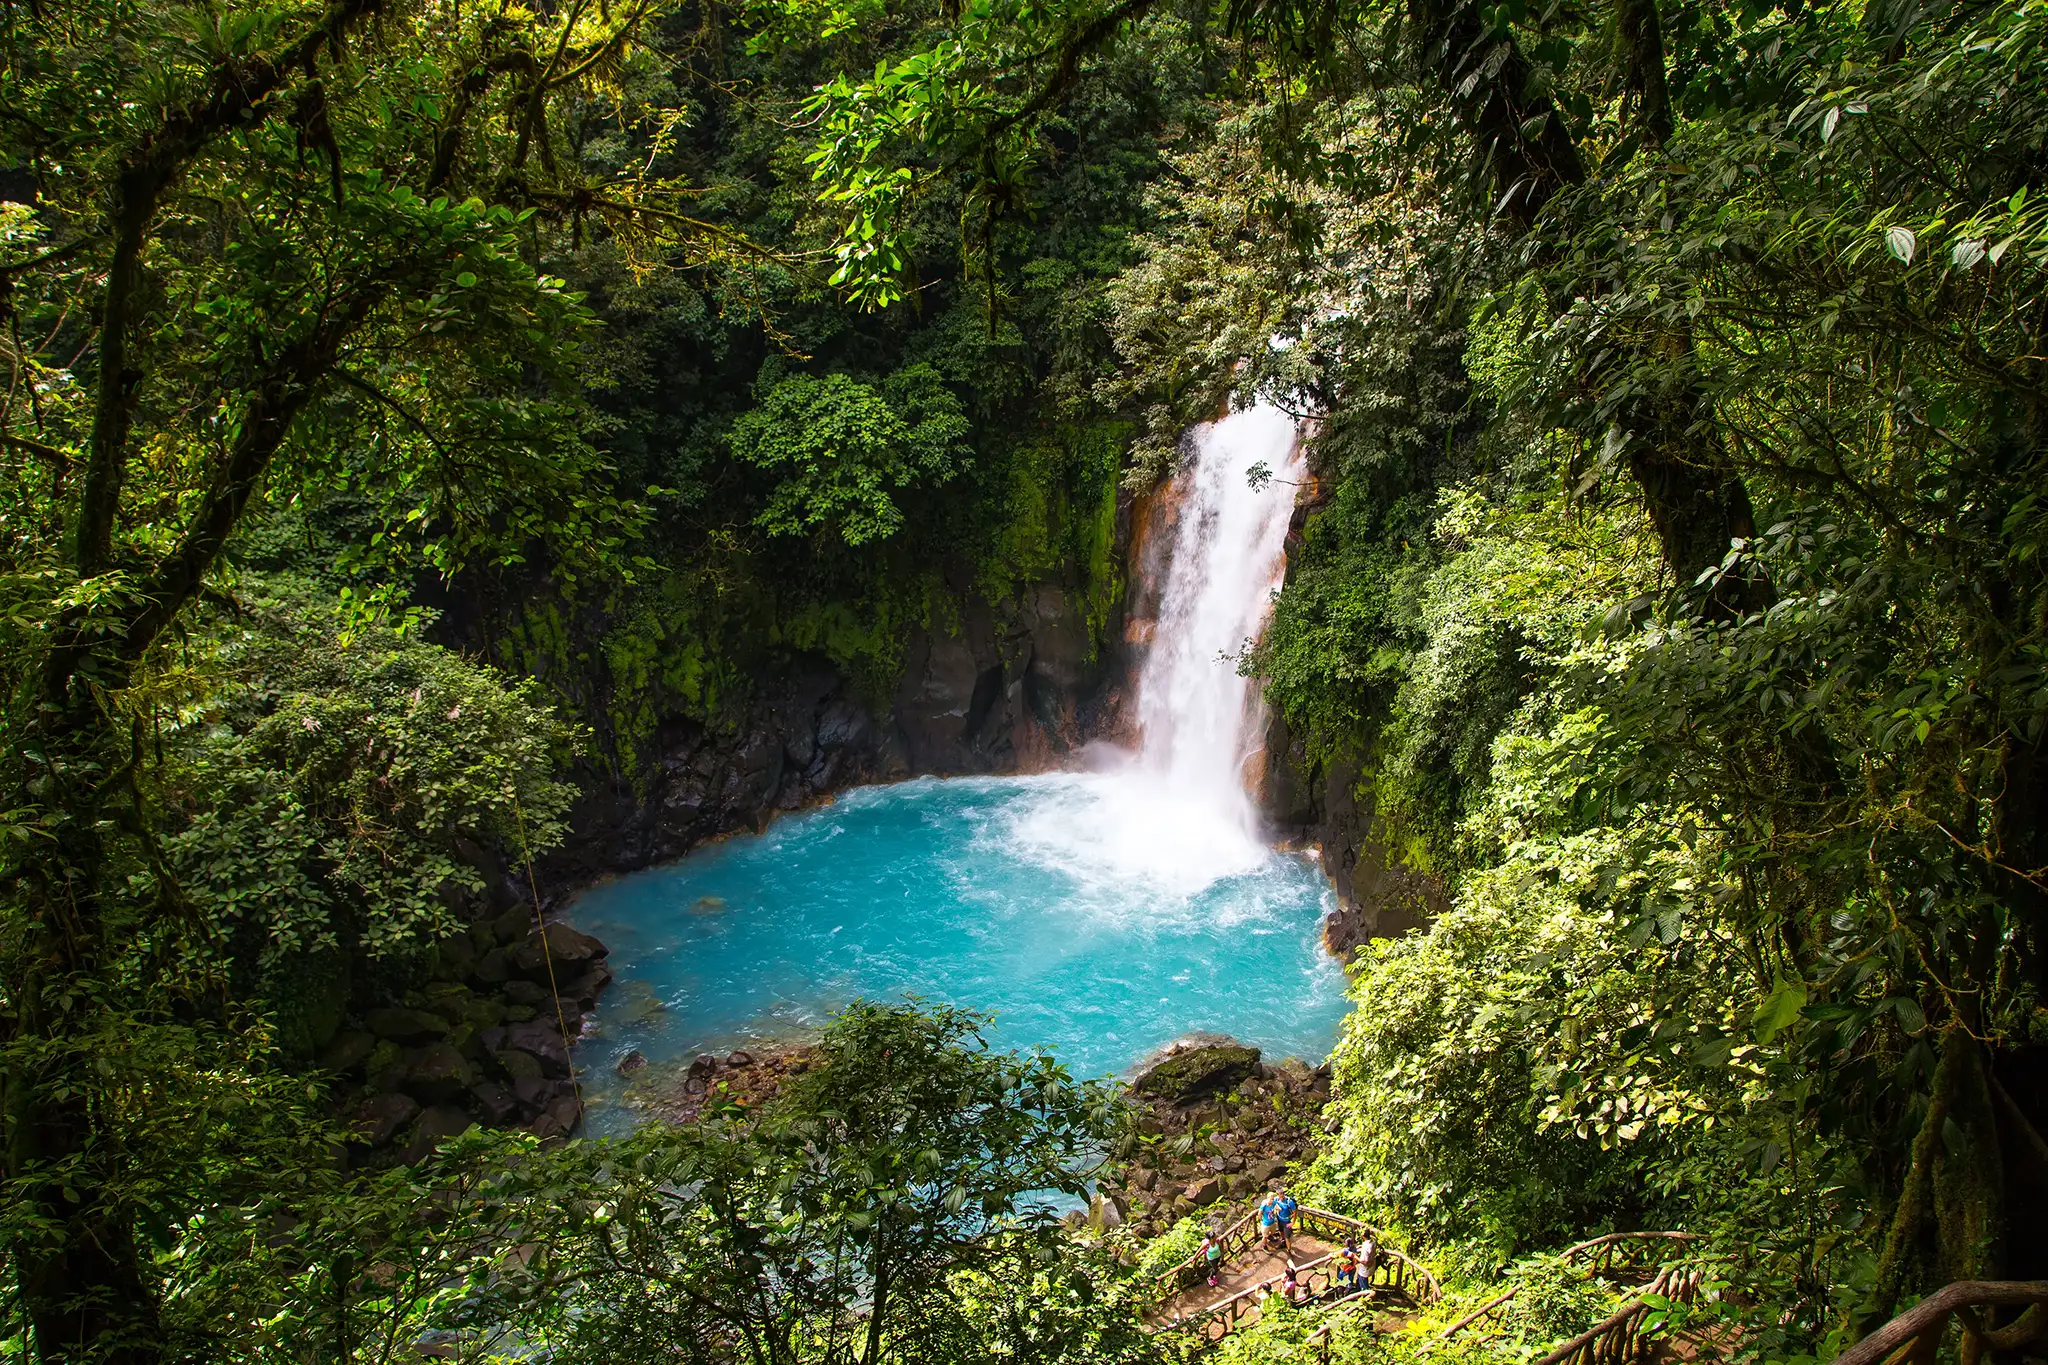 The famous waterfall of the Rio Azul, Costa Rica.